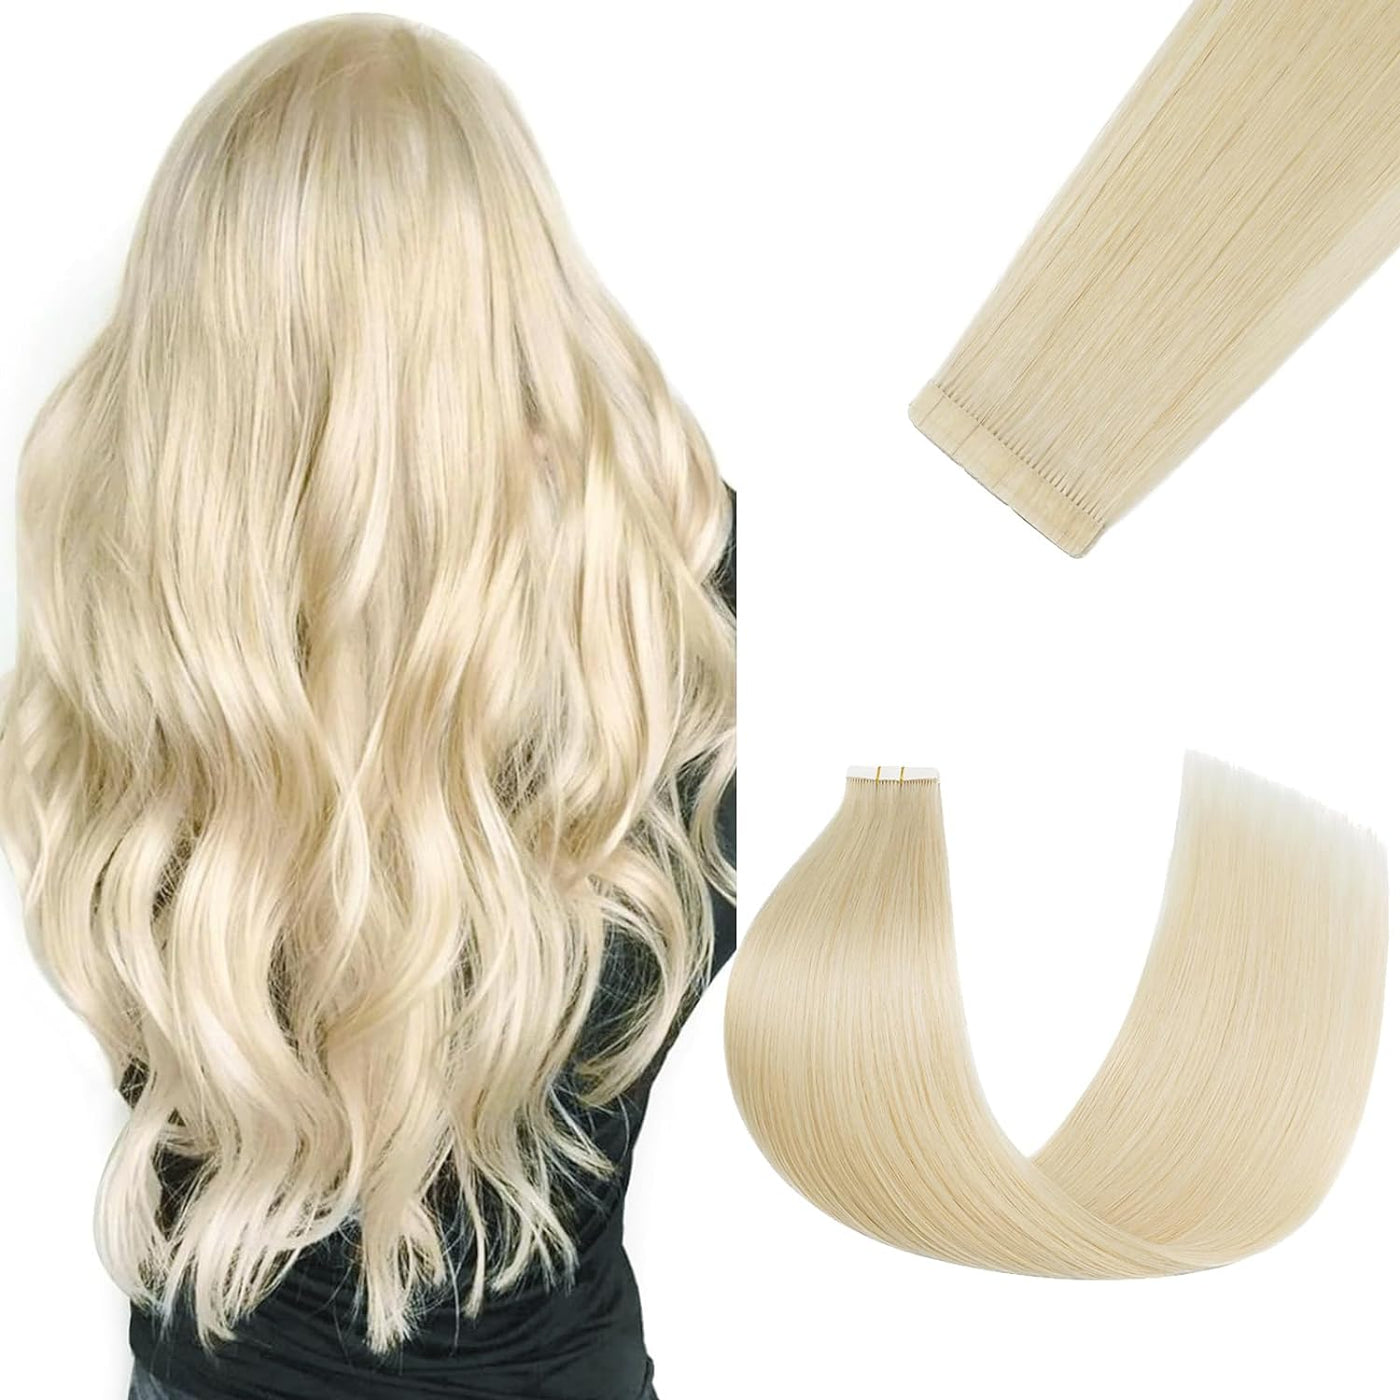 10A Blonde Body Wave Tape Ins Human Hair Extension #613